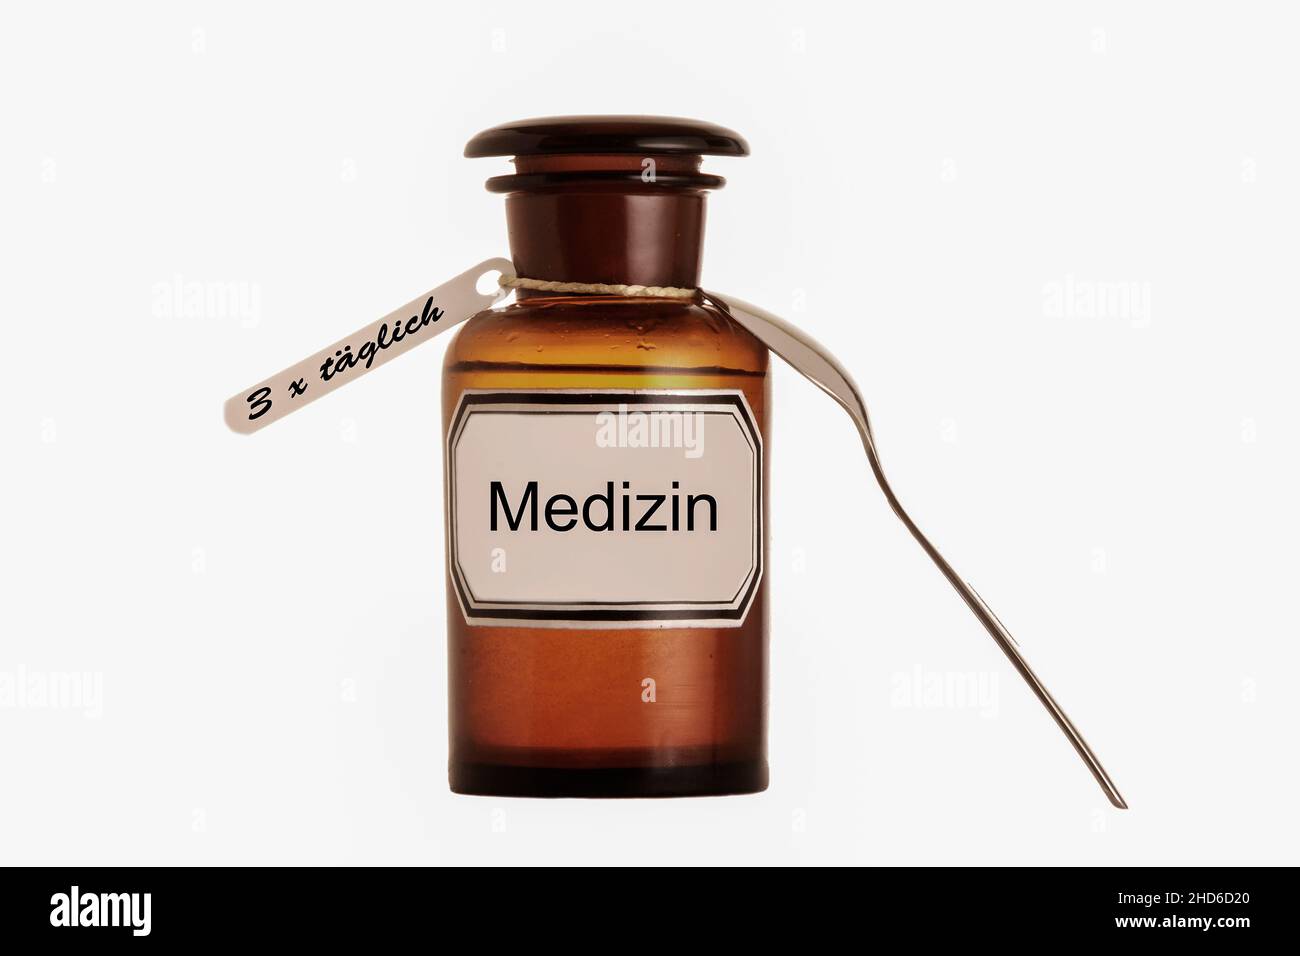 old medicine bottle with label Stock Photo